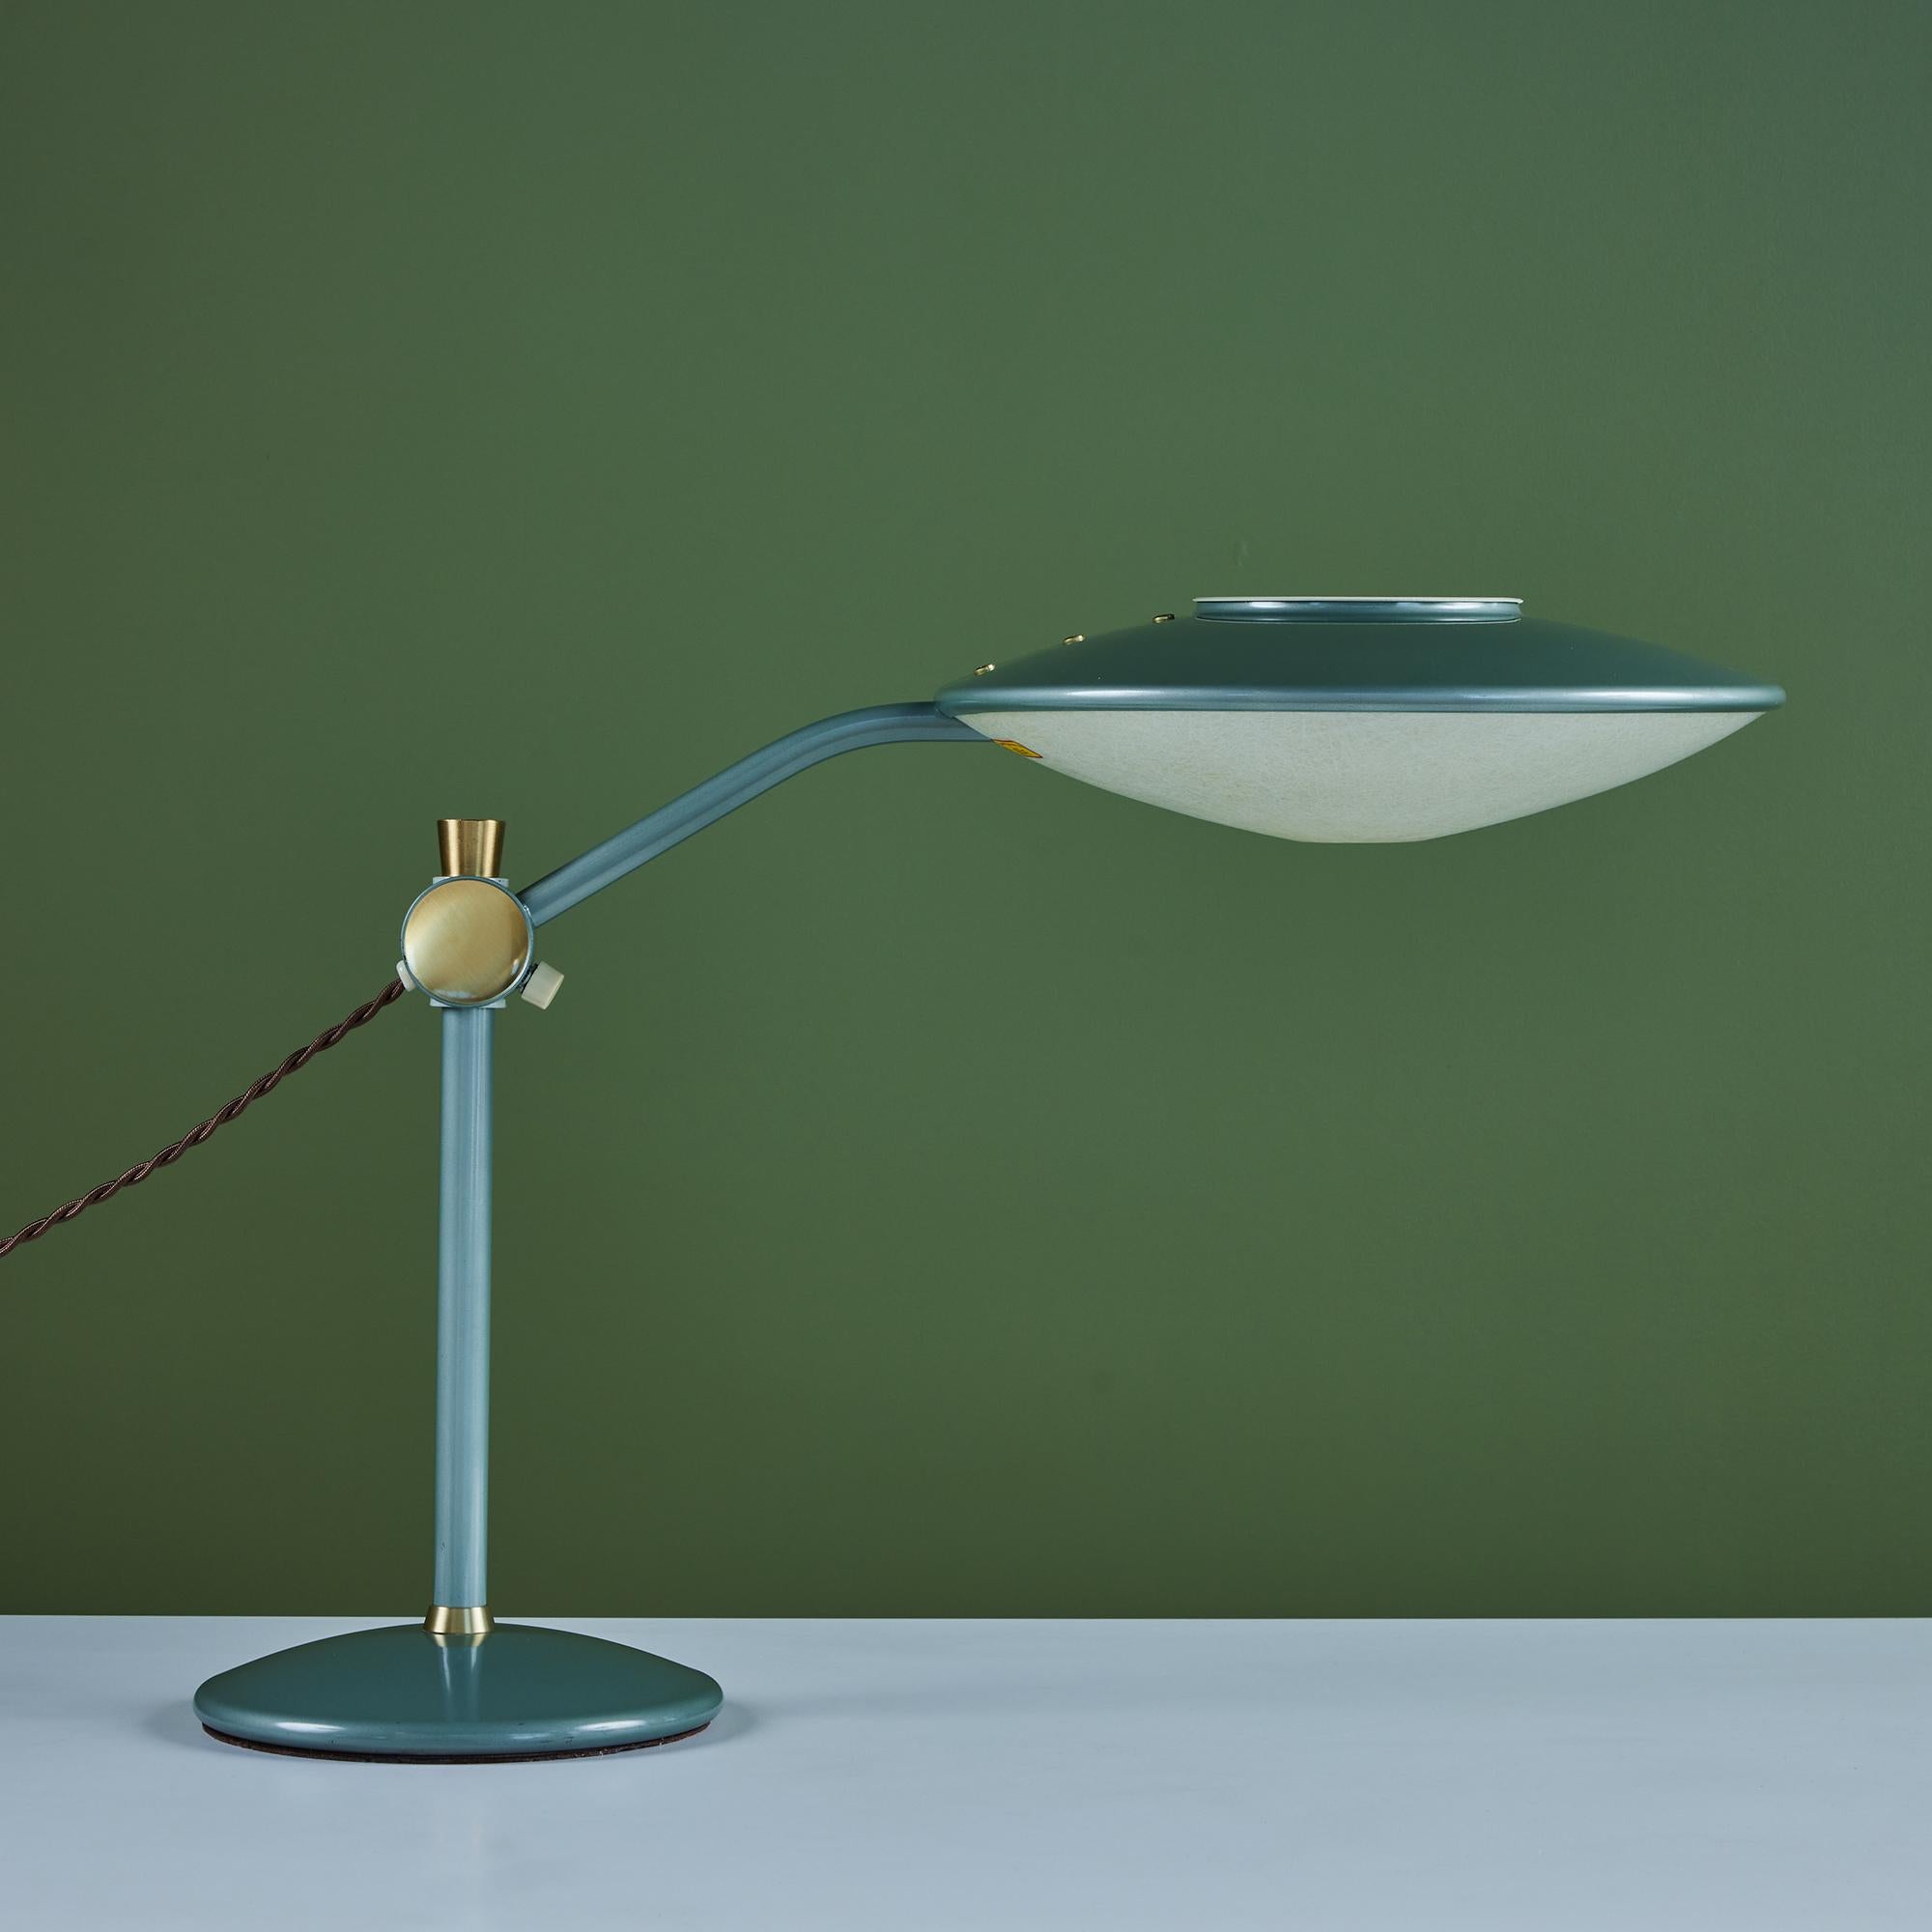 American Dazor Green Enamel Desk Lamp with Brass Accents